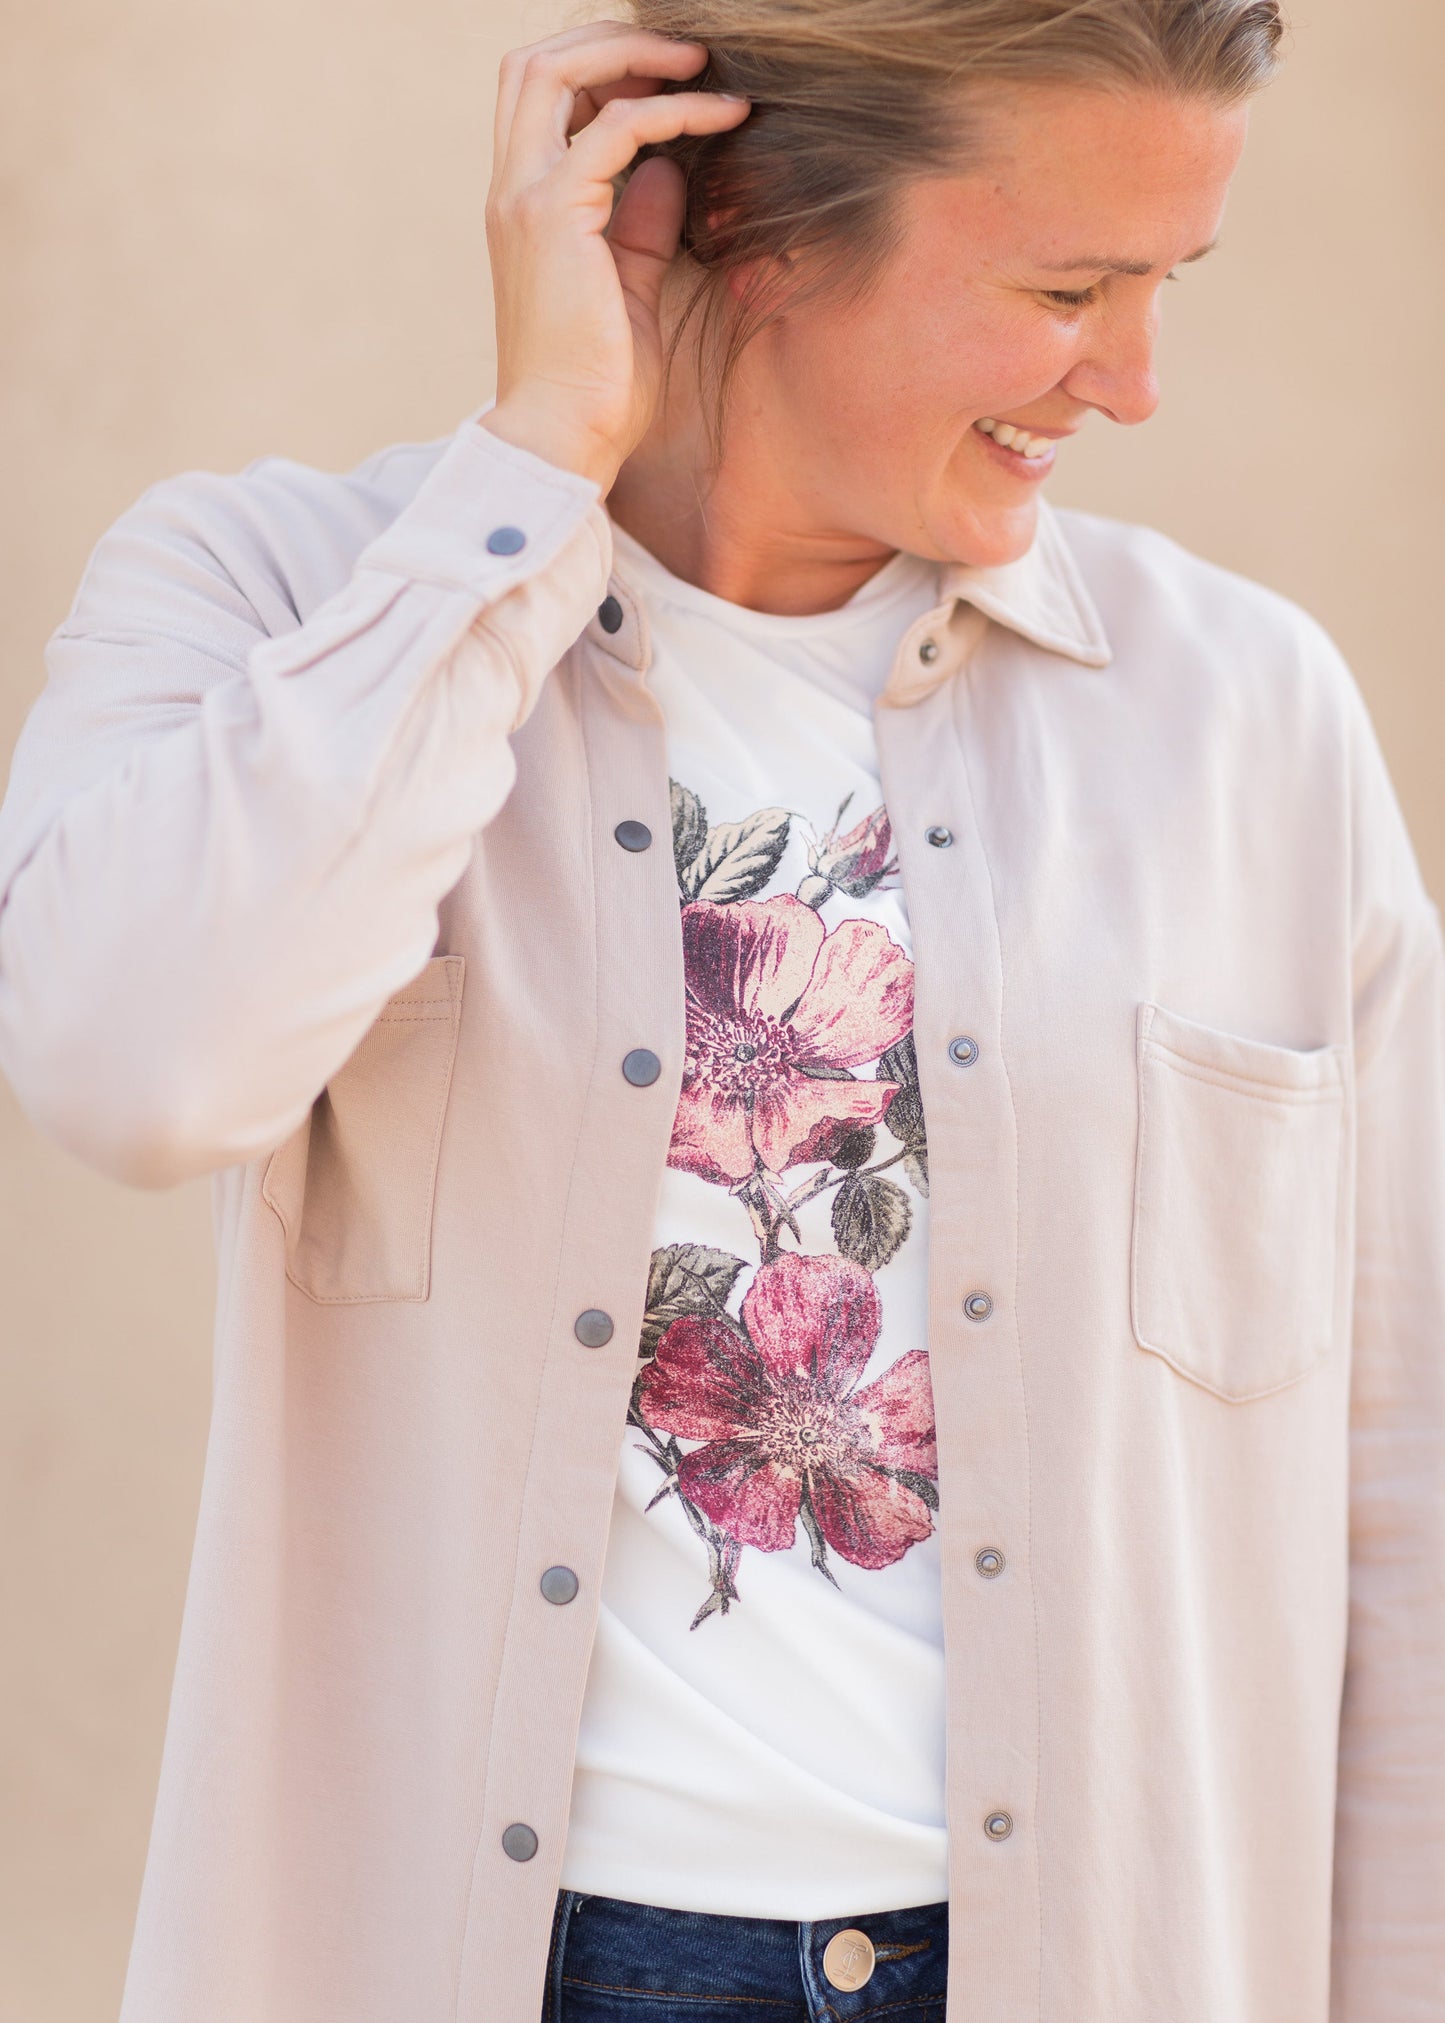 Floral Graphic Tee Tops